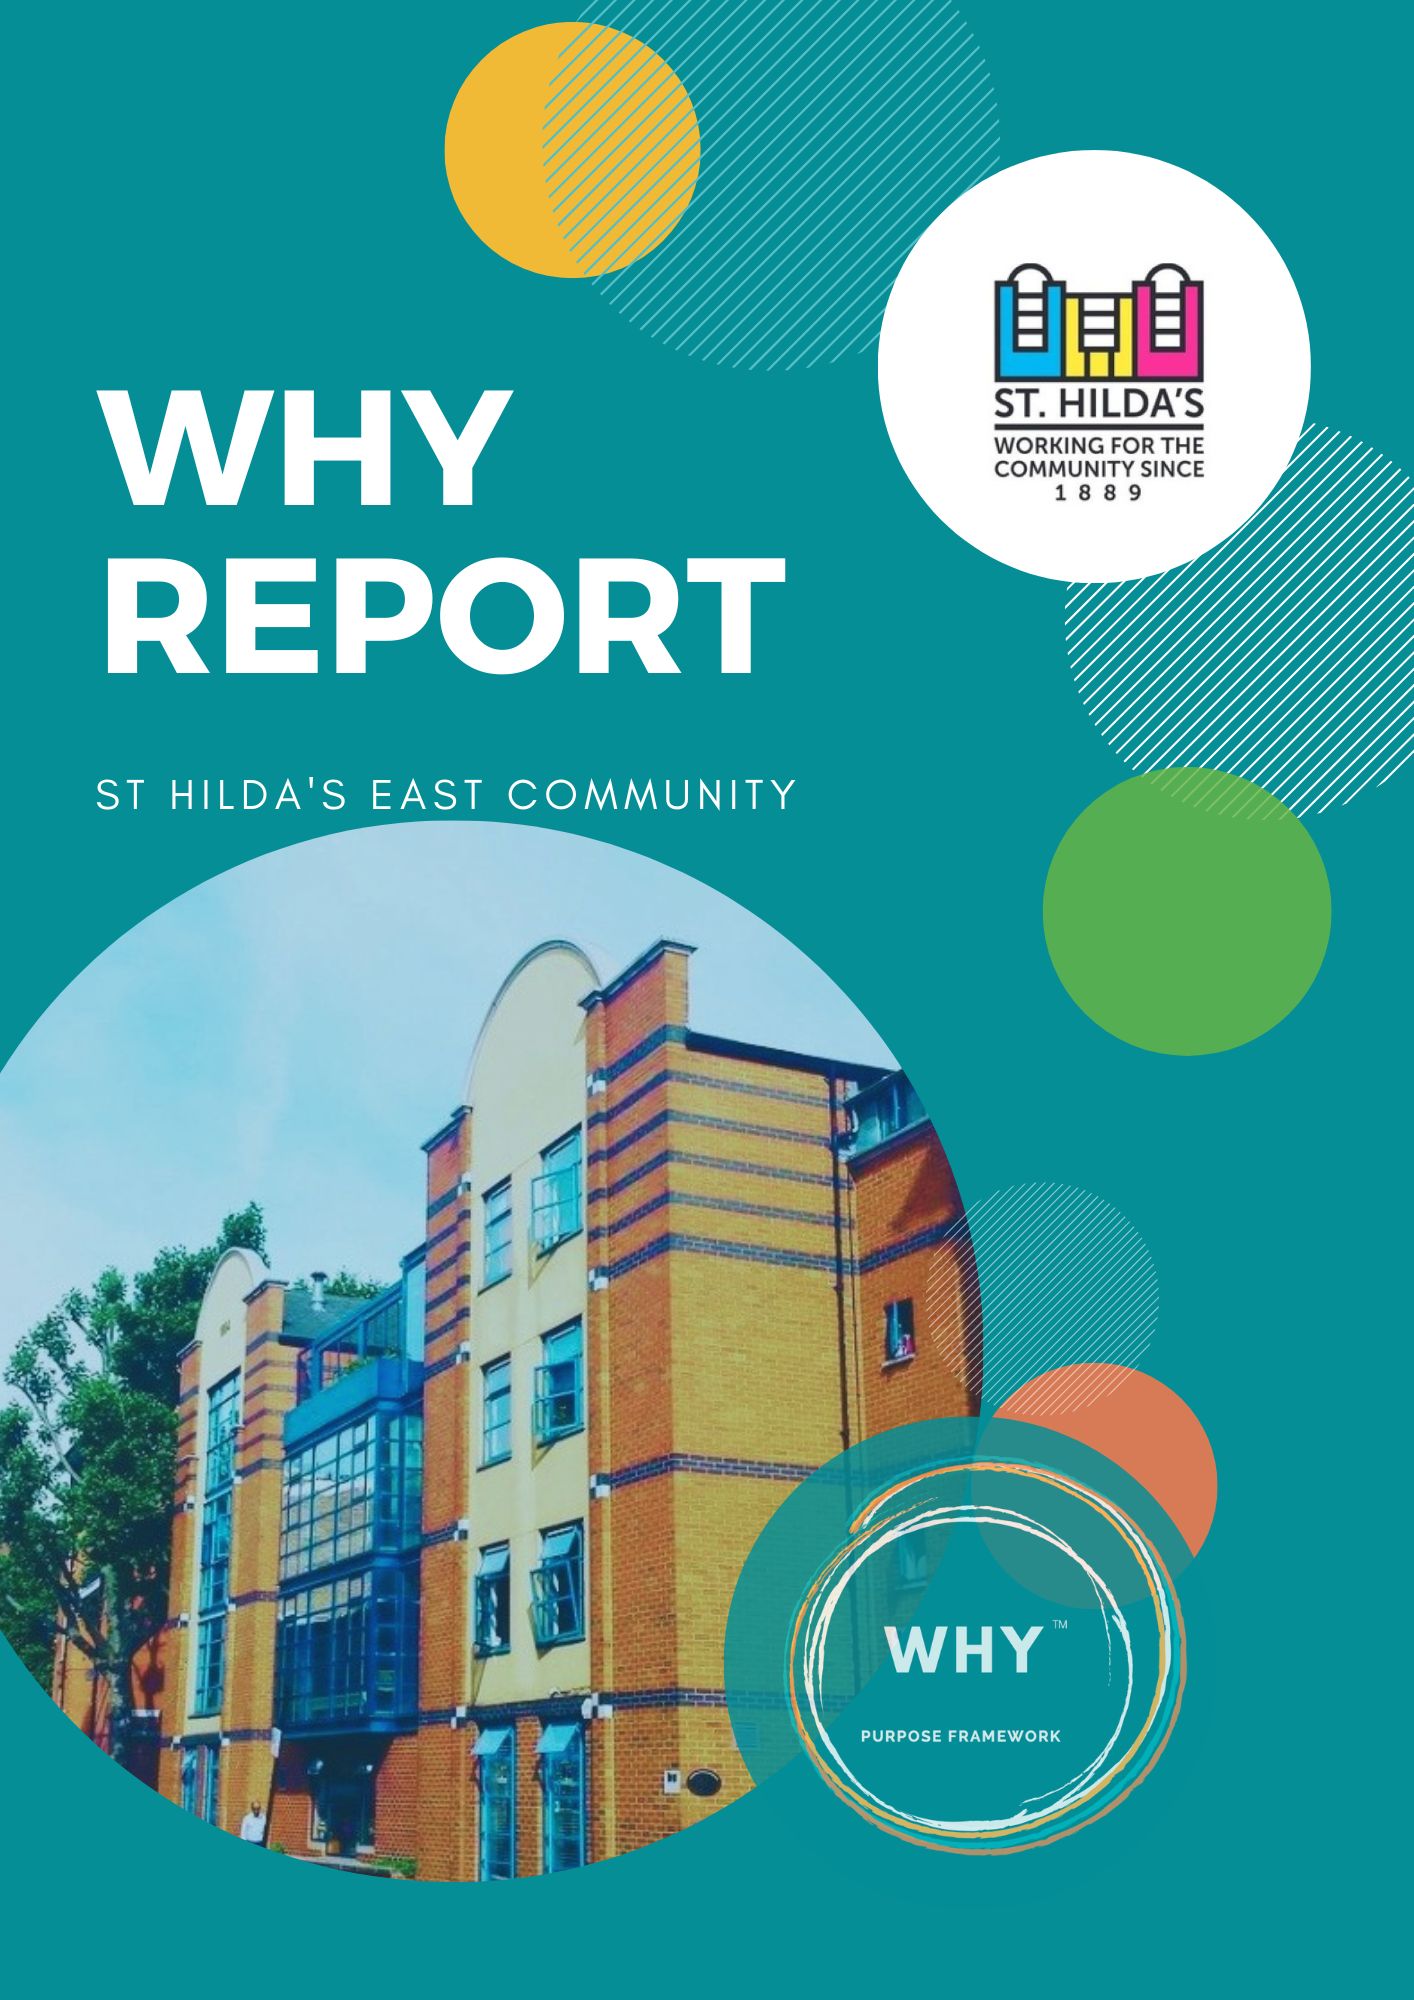 WHY Report St Hilda's East Charity finding purpose.